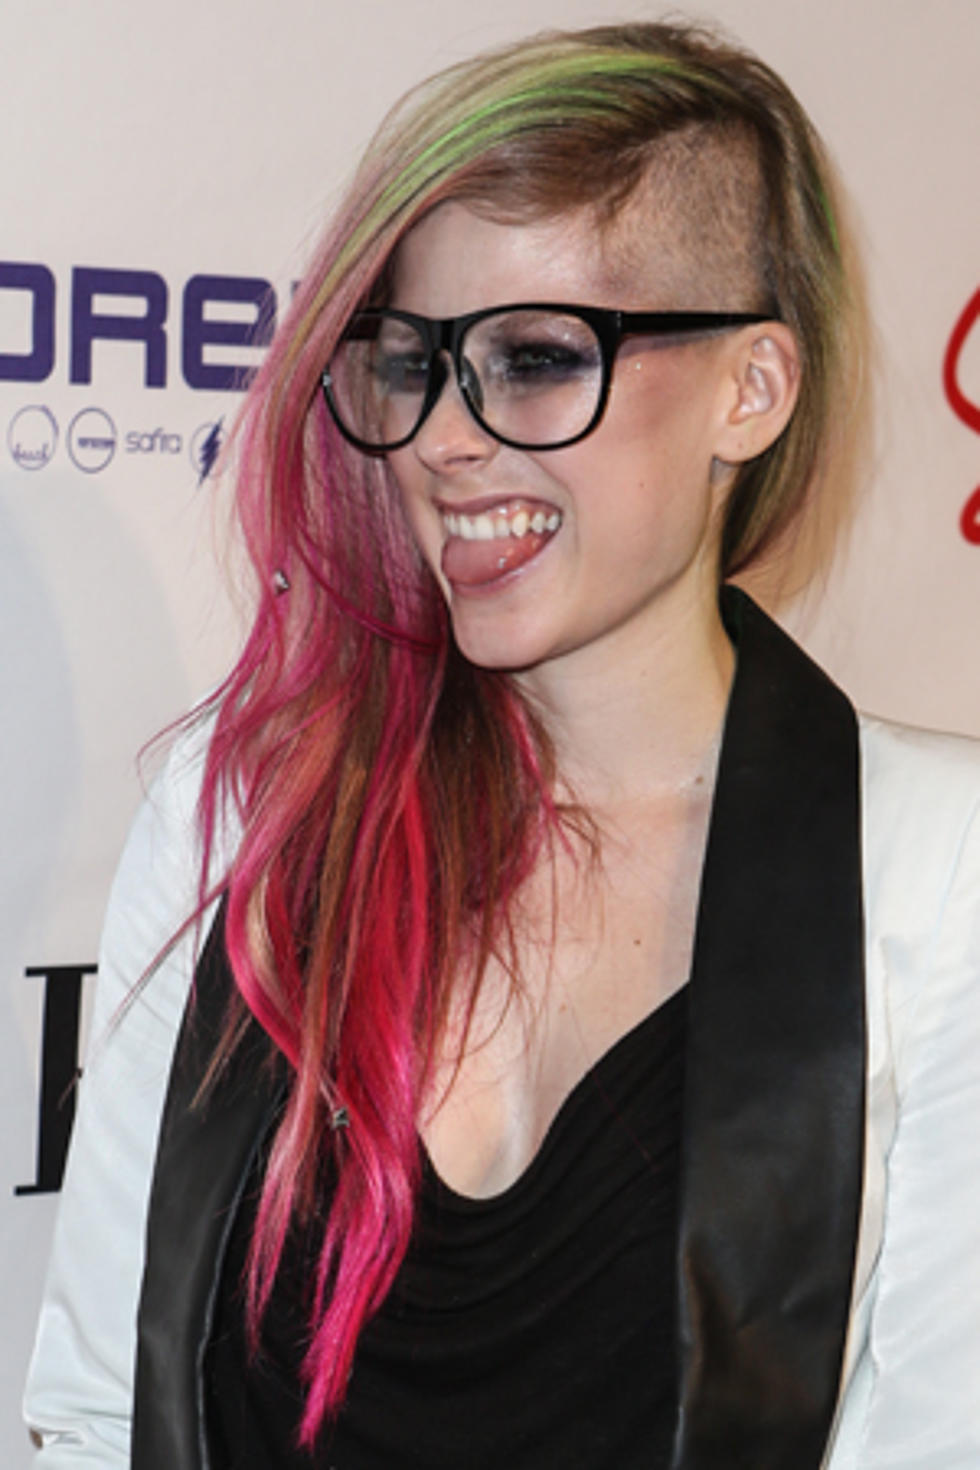 Avril Lavigne Rocks New Multicolored Hair Talks About Her